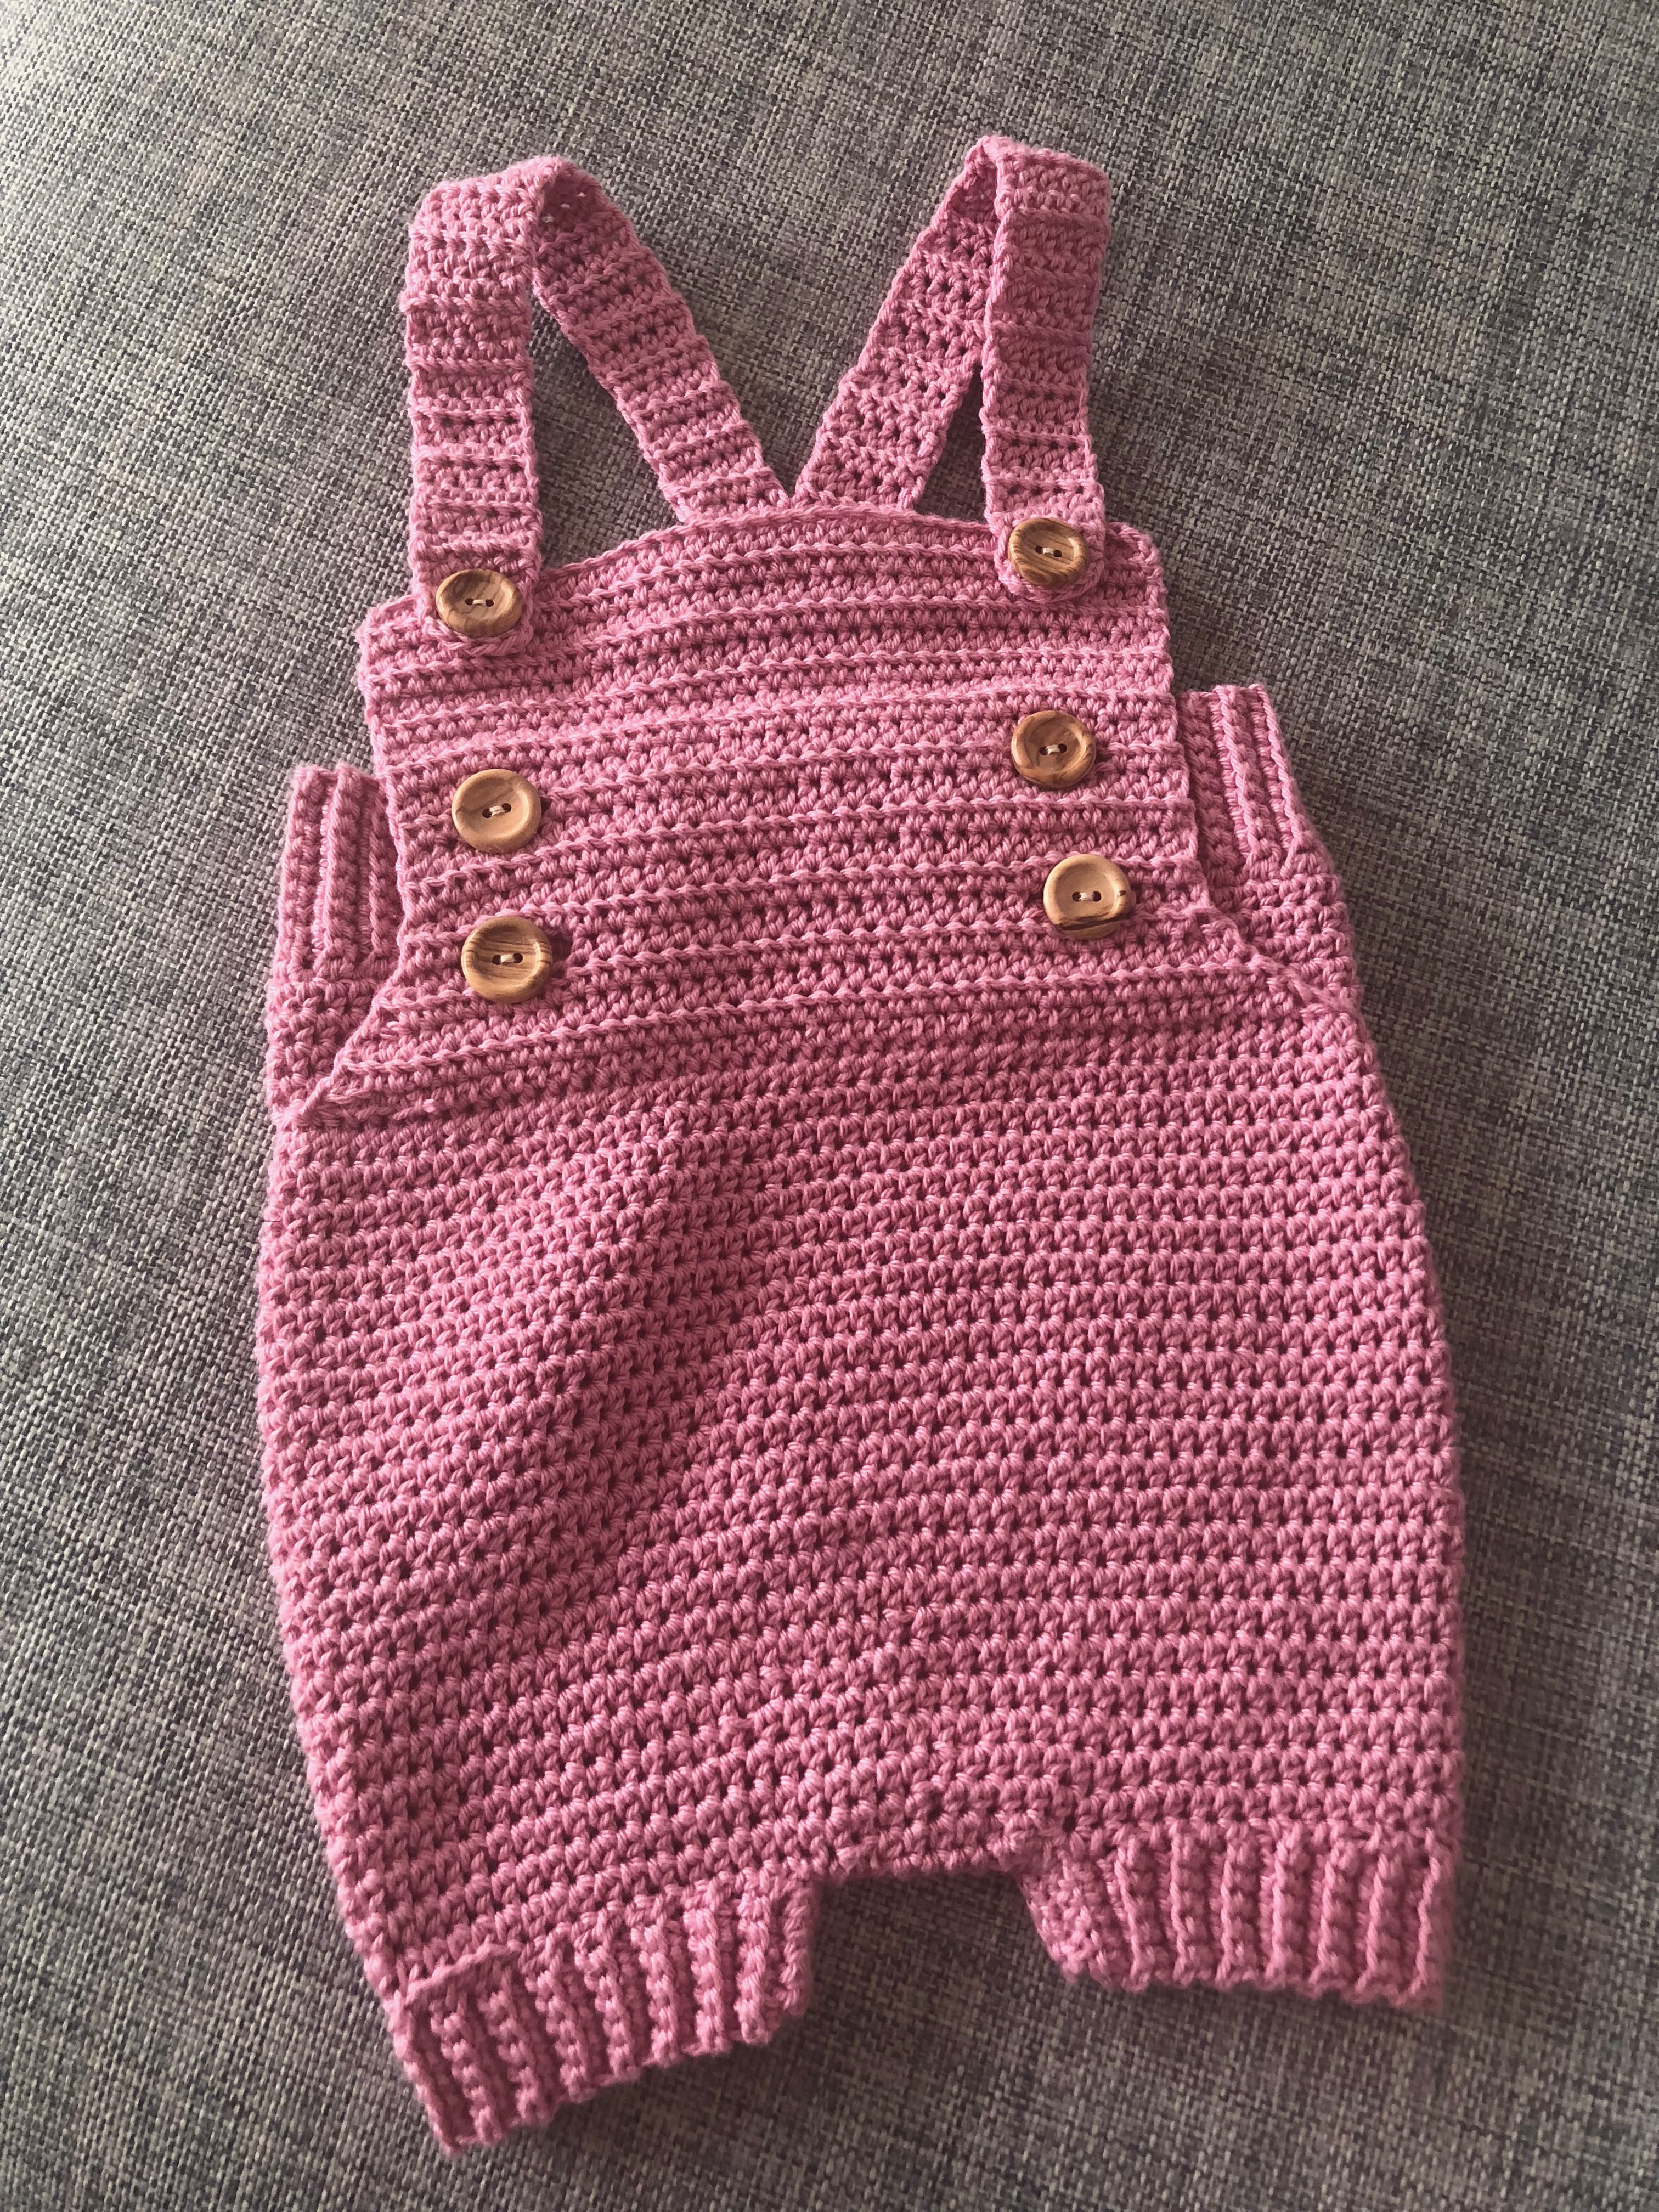 Knitted romper by Lollo